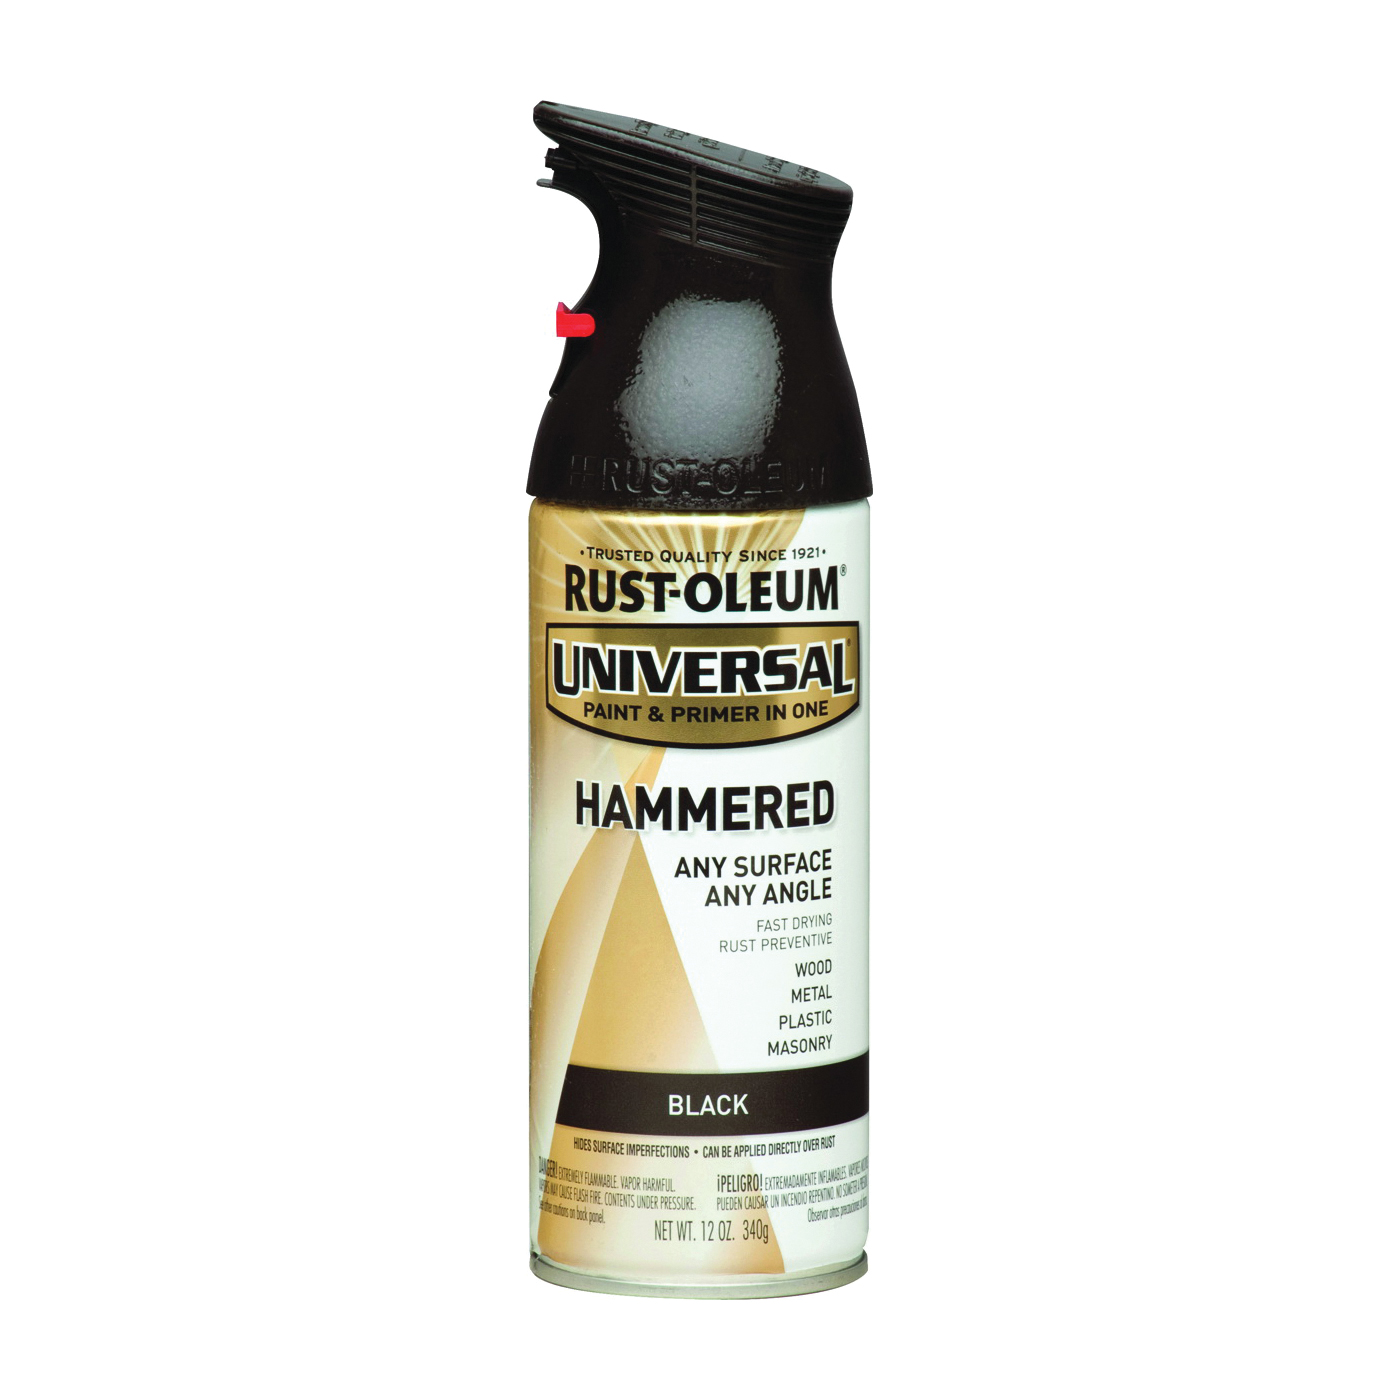 Rust-Oleum 245217 Hammered Spray Paint, Hammered, Black, 12 oz, Can - 1